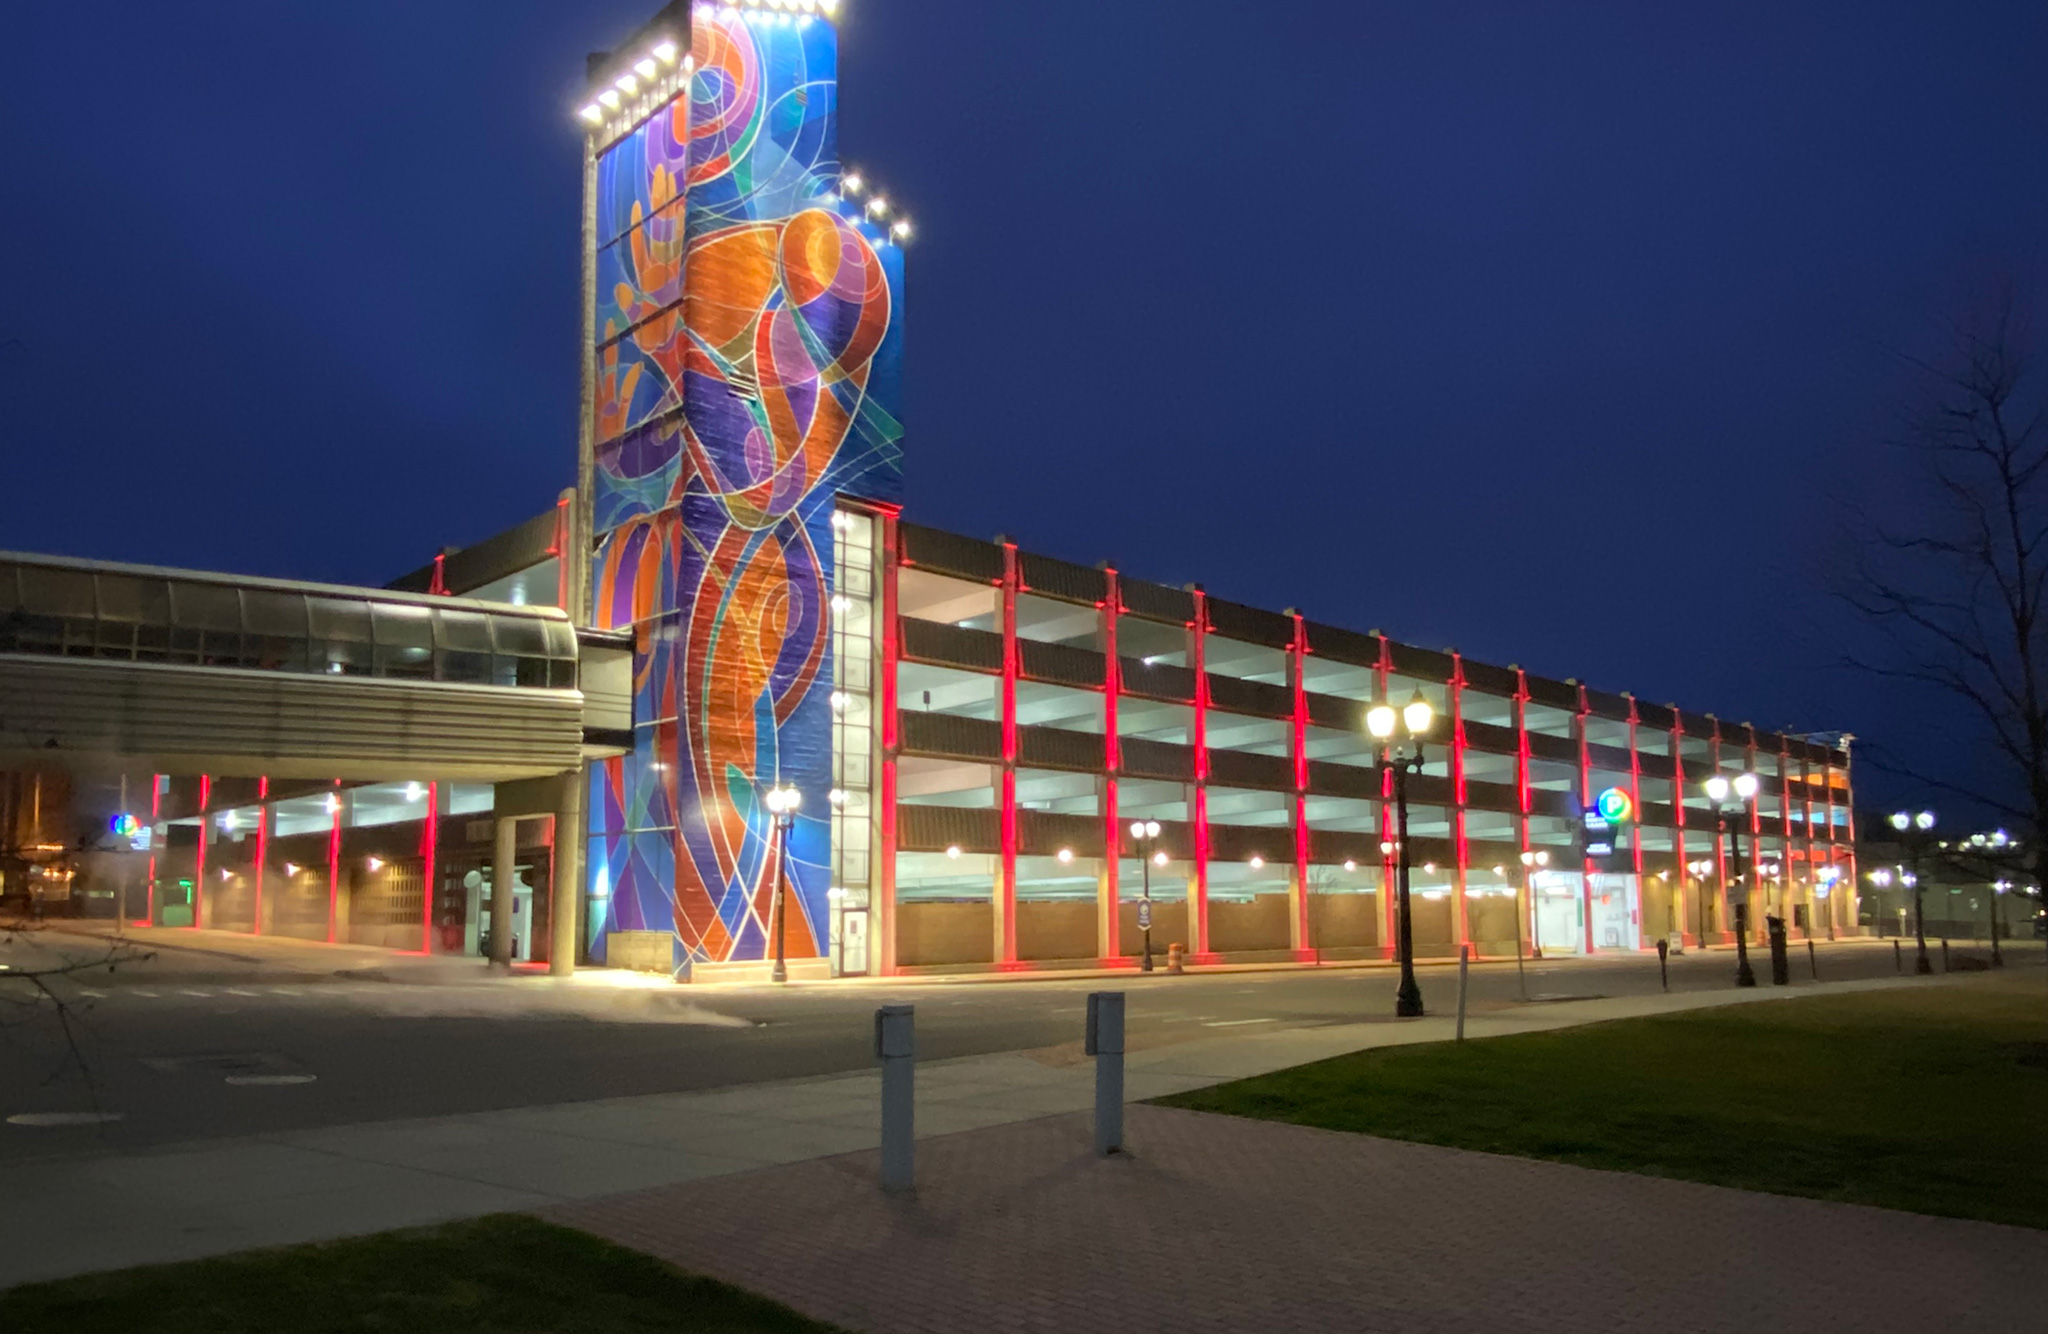 Exterior of Lansing parking structure at night after "extreme makeover"